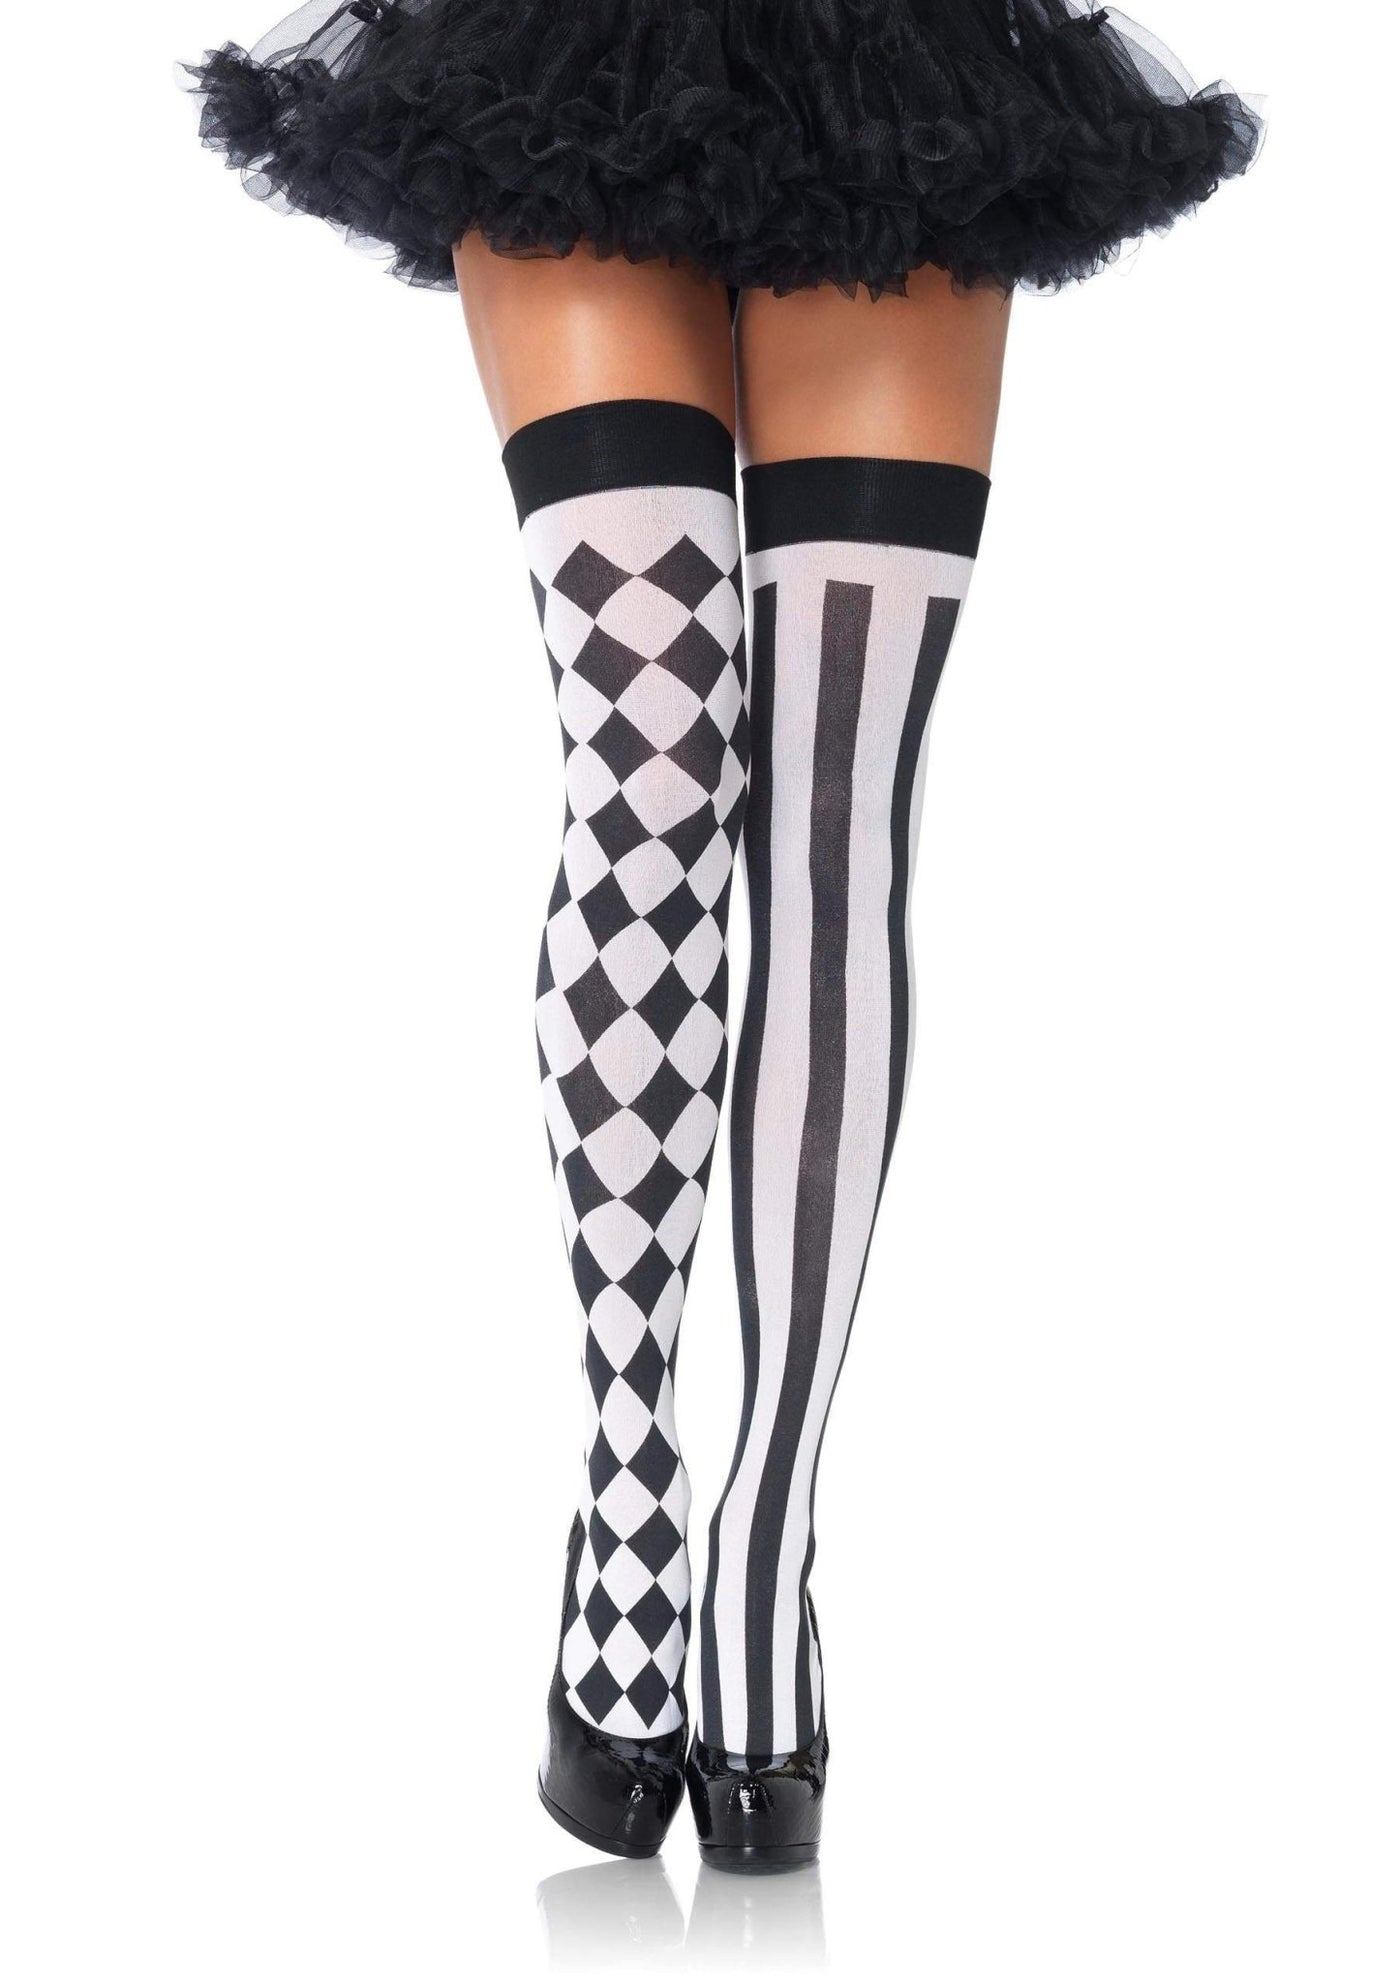 Harlequin Thigh Highs - JJ's Party House